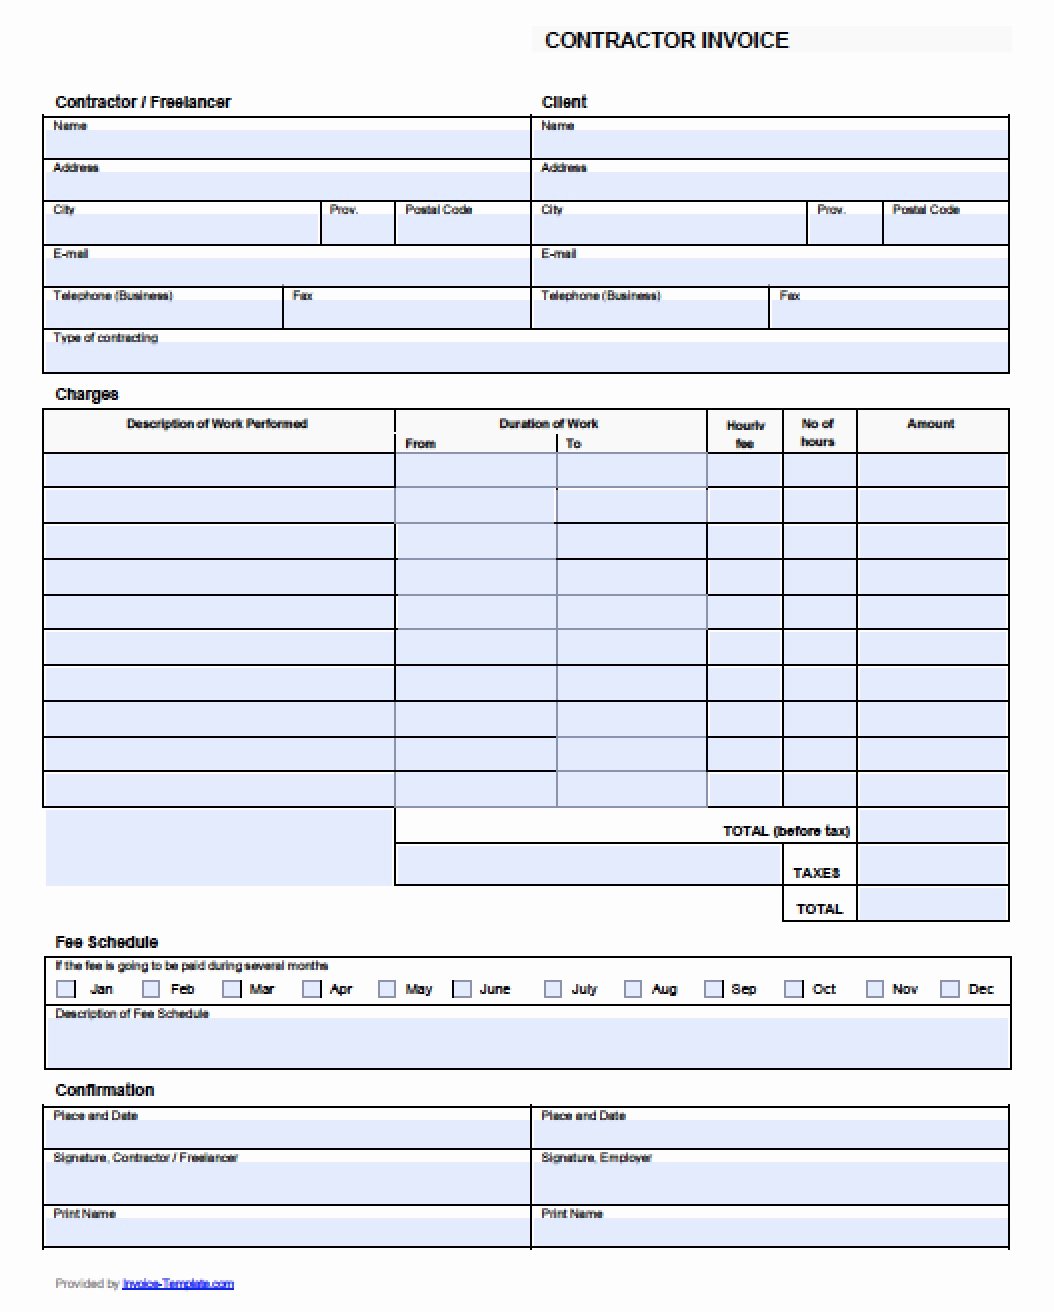 Contractor Invoice Template Excel Luxury Free Contractor Invoice Template Excel Pdf